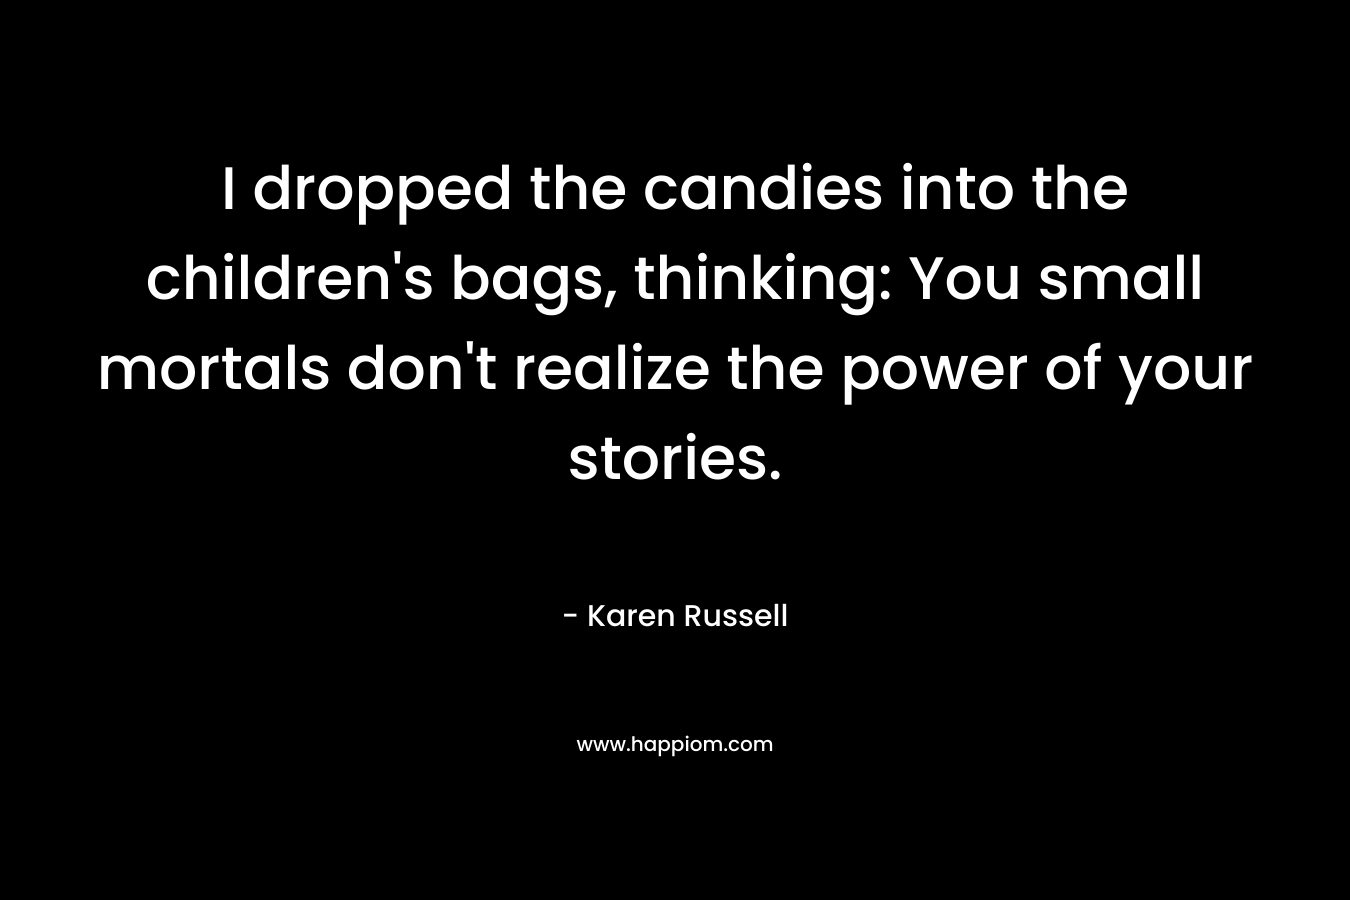 I dropped the candies into the children's bags, thinking: You small mortals don't realize the power of your stories.